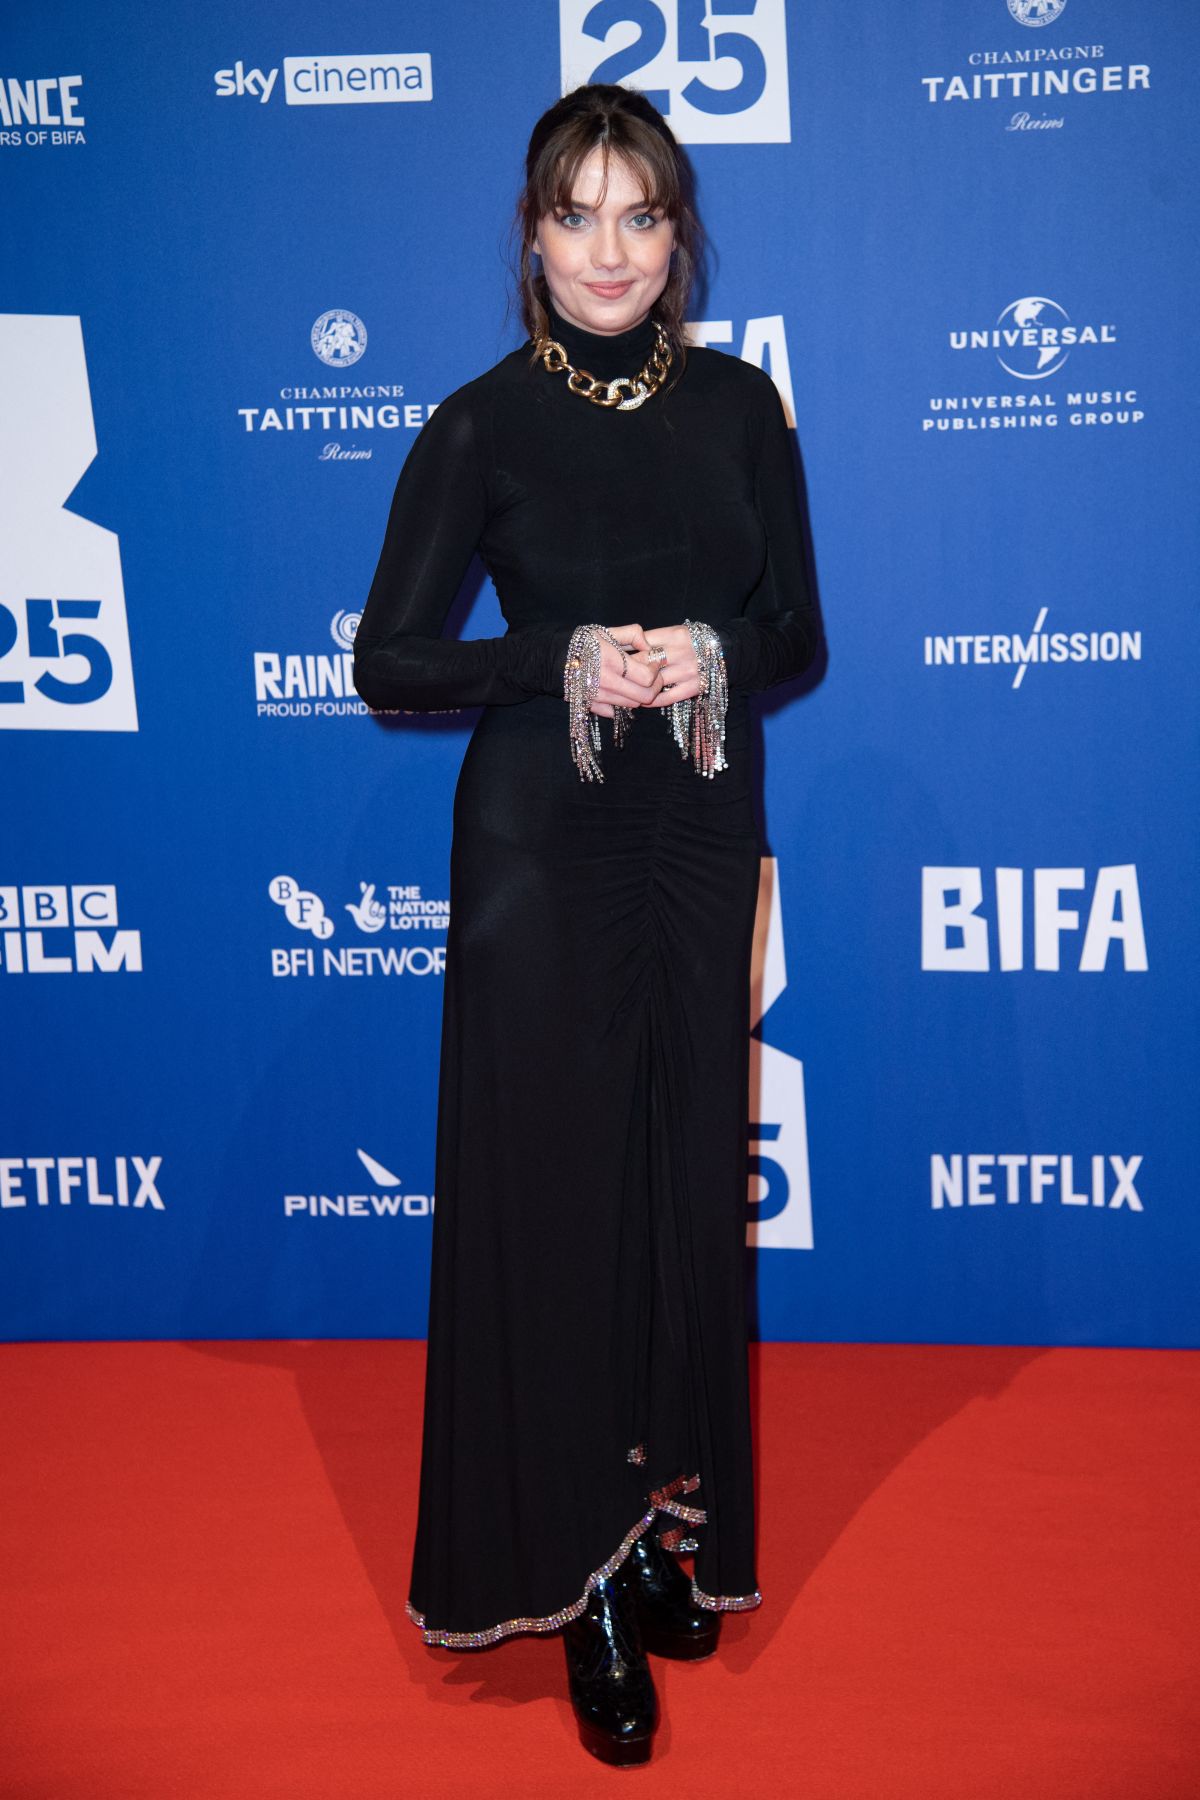 NELL BARLOW at 25th British Independent Film Awards in London 12/04 ...